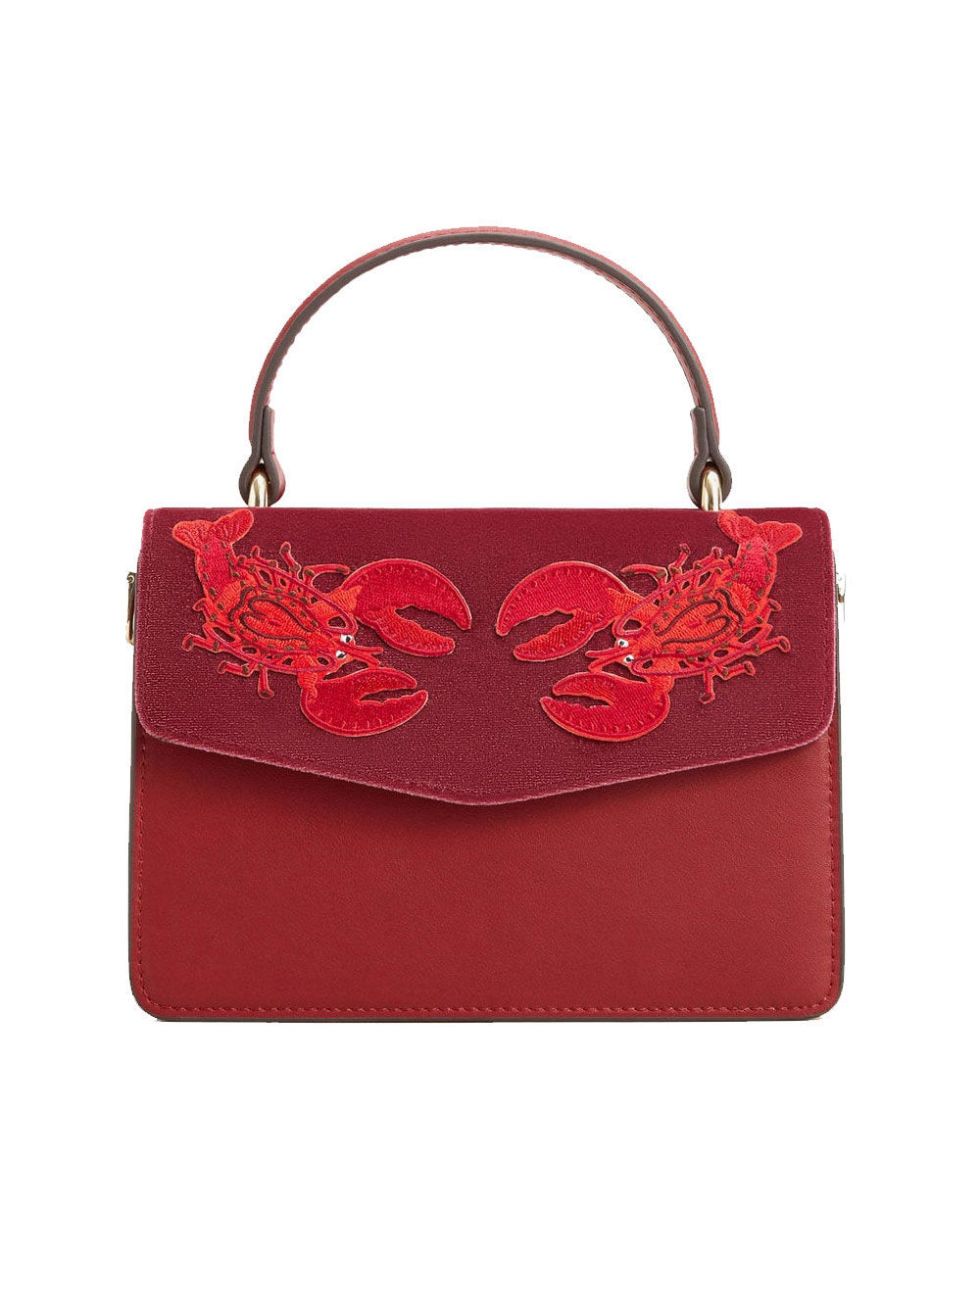 Handbag, Bag, Red, Fashion accessory, Shoulder bag, Leather, Pink, Material property, Coquelicot, Luggage and bags, 